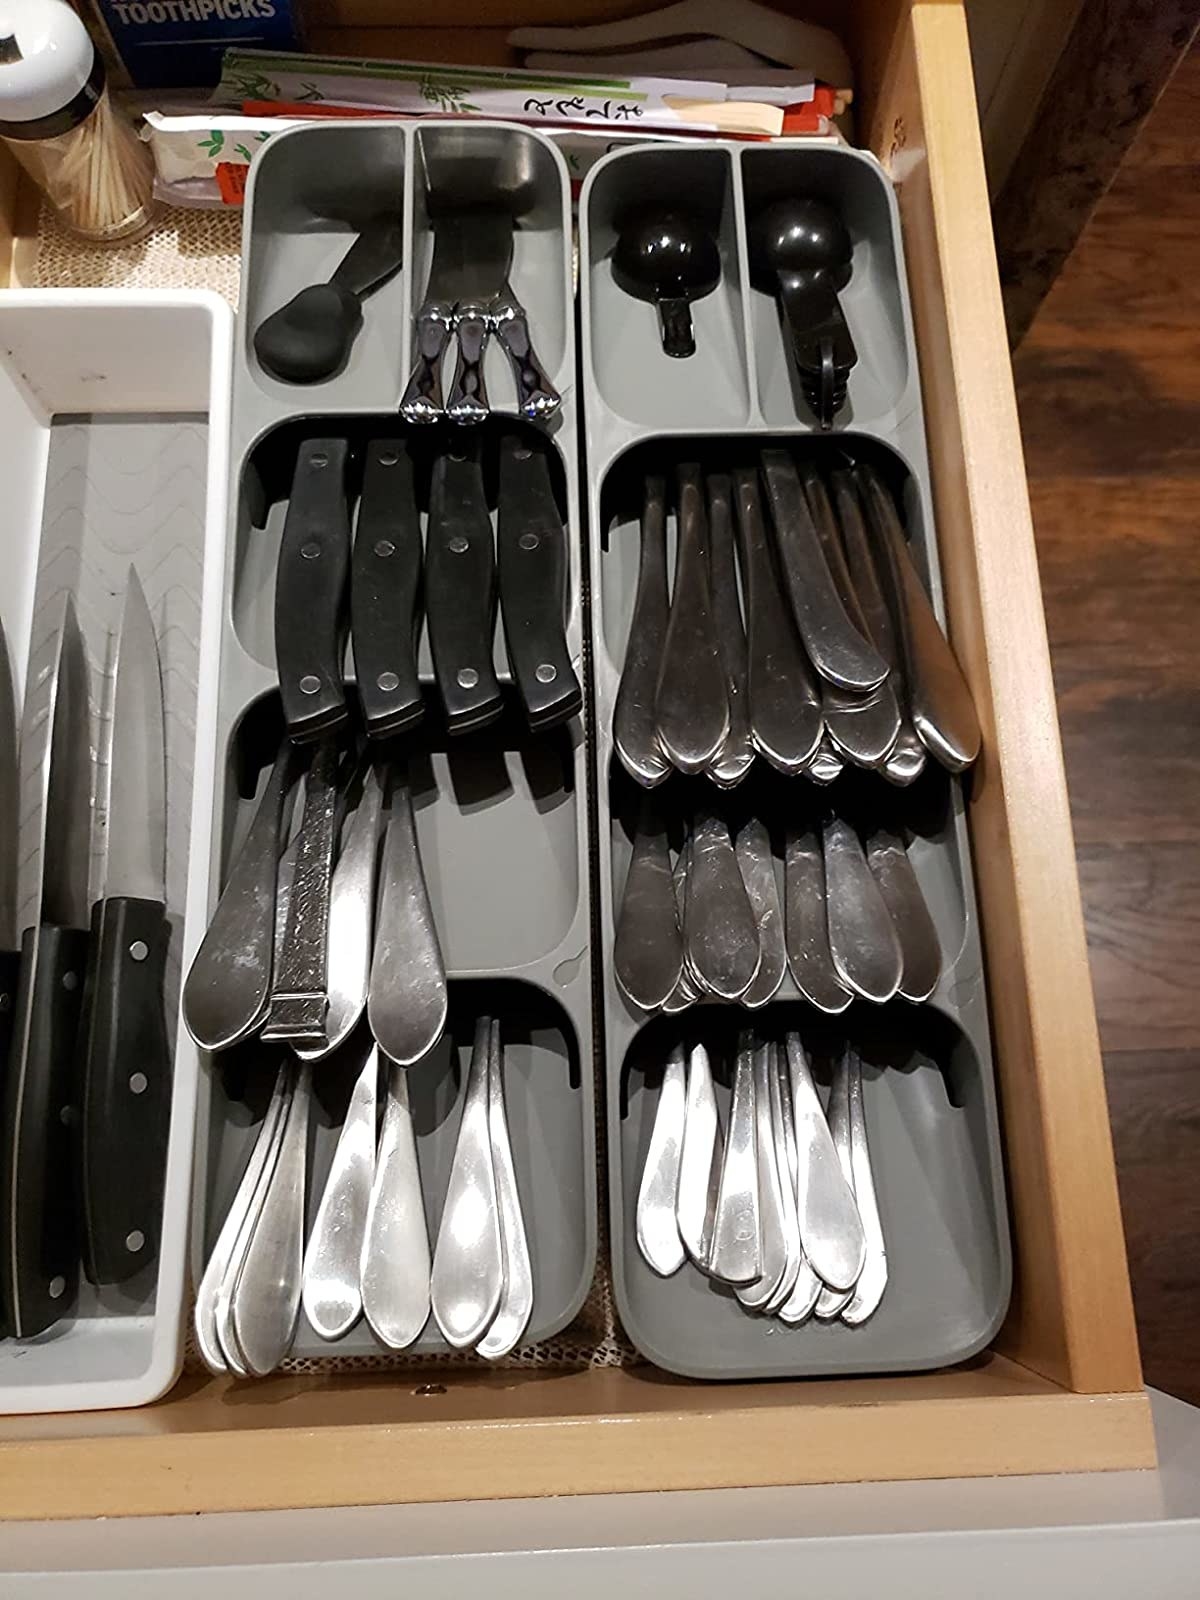 Reviewer image of flatware in two gray organizers inside their drawer